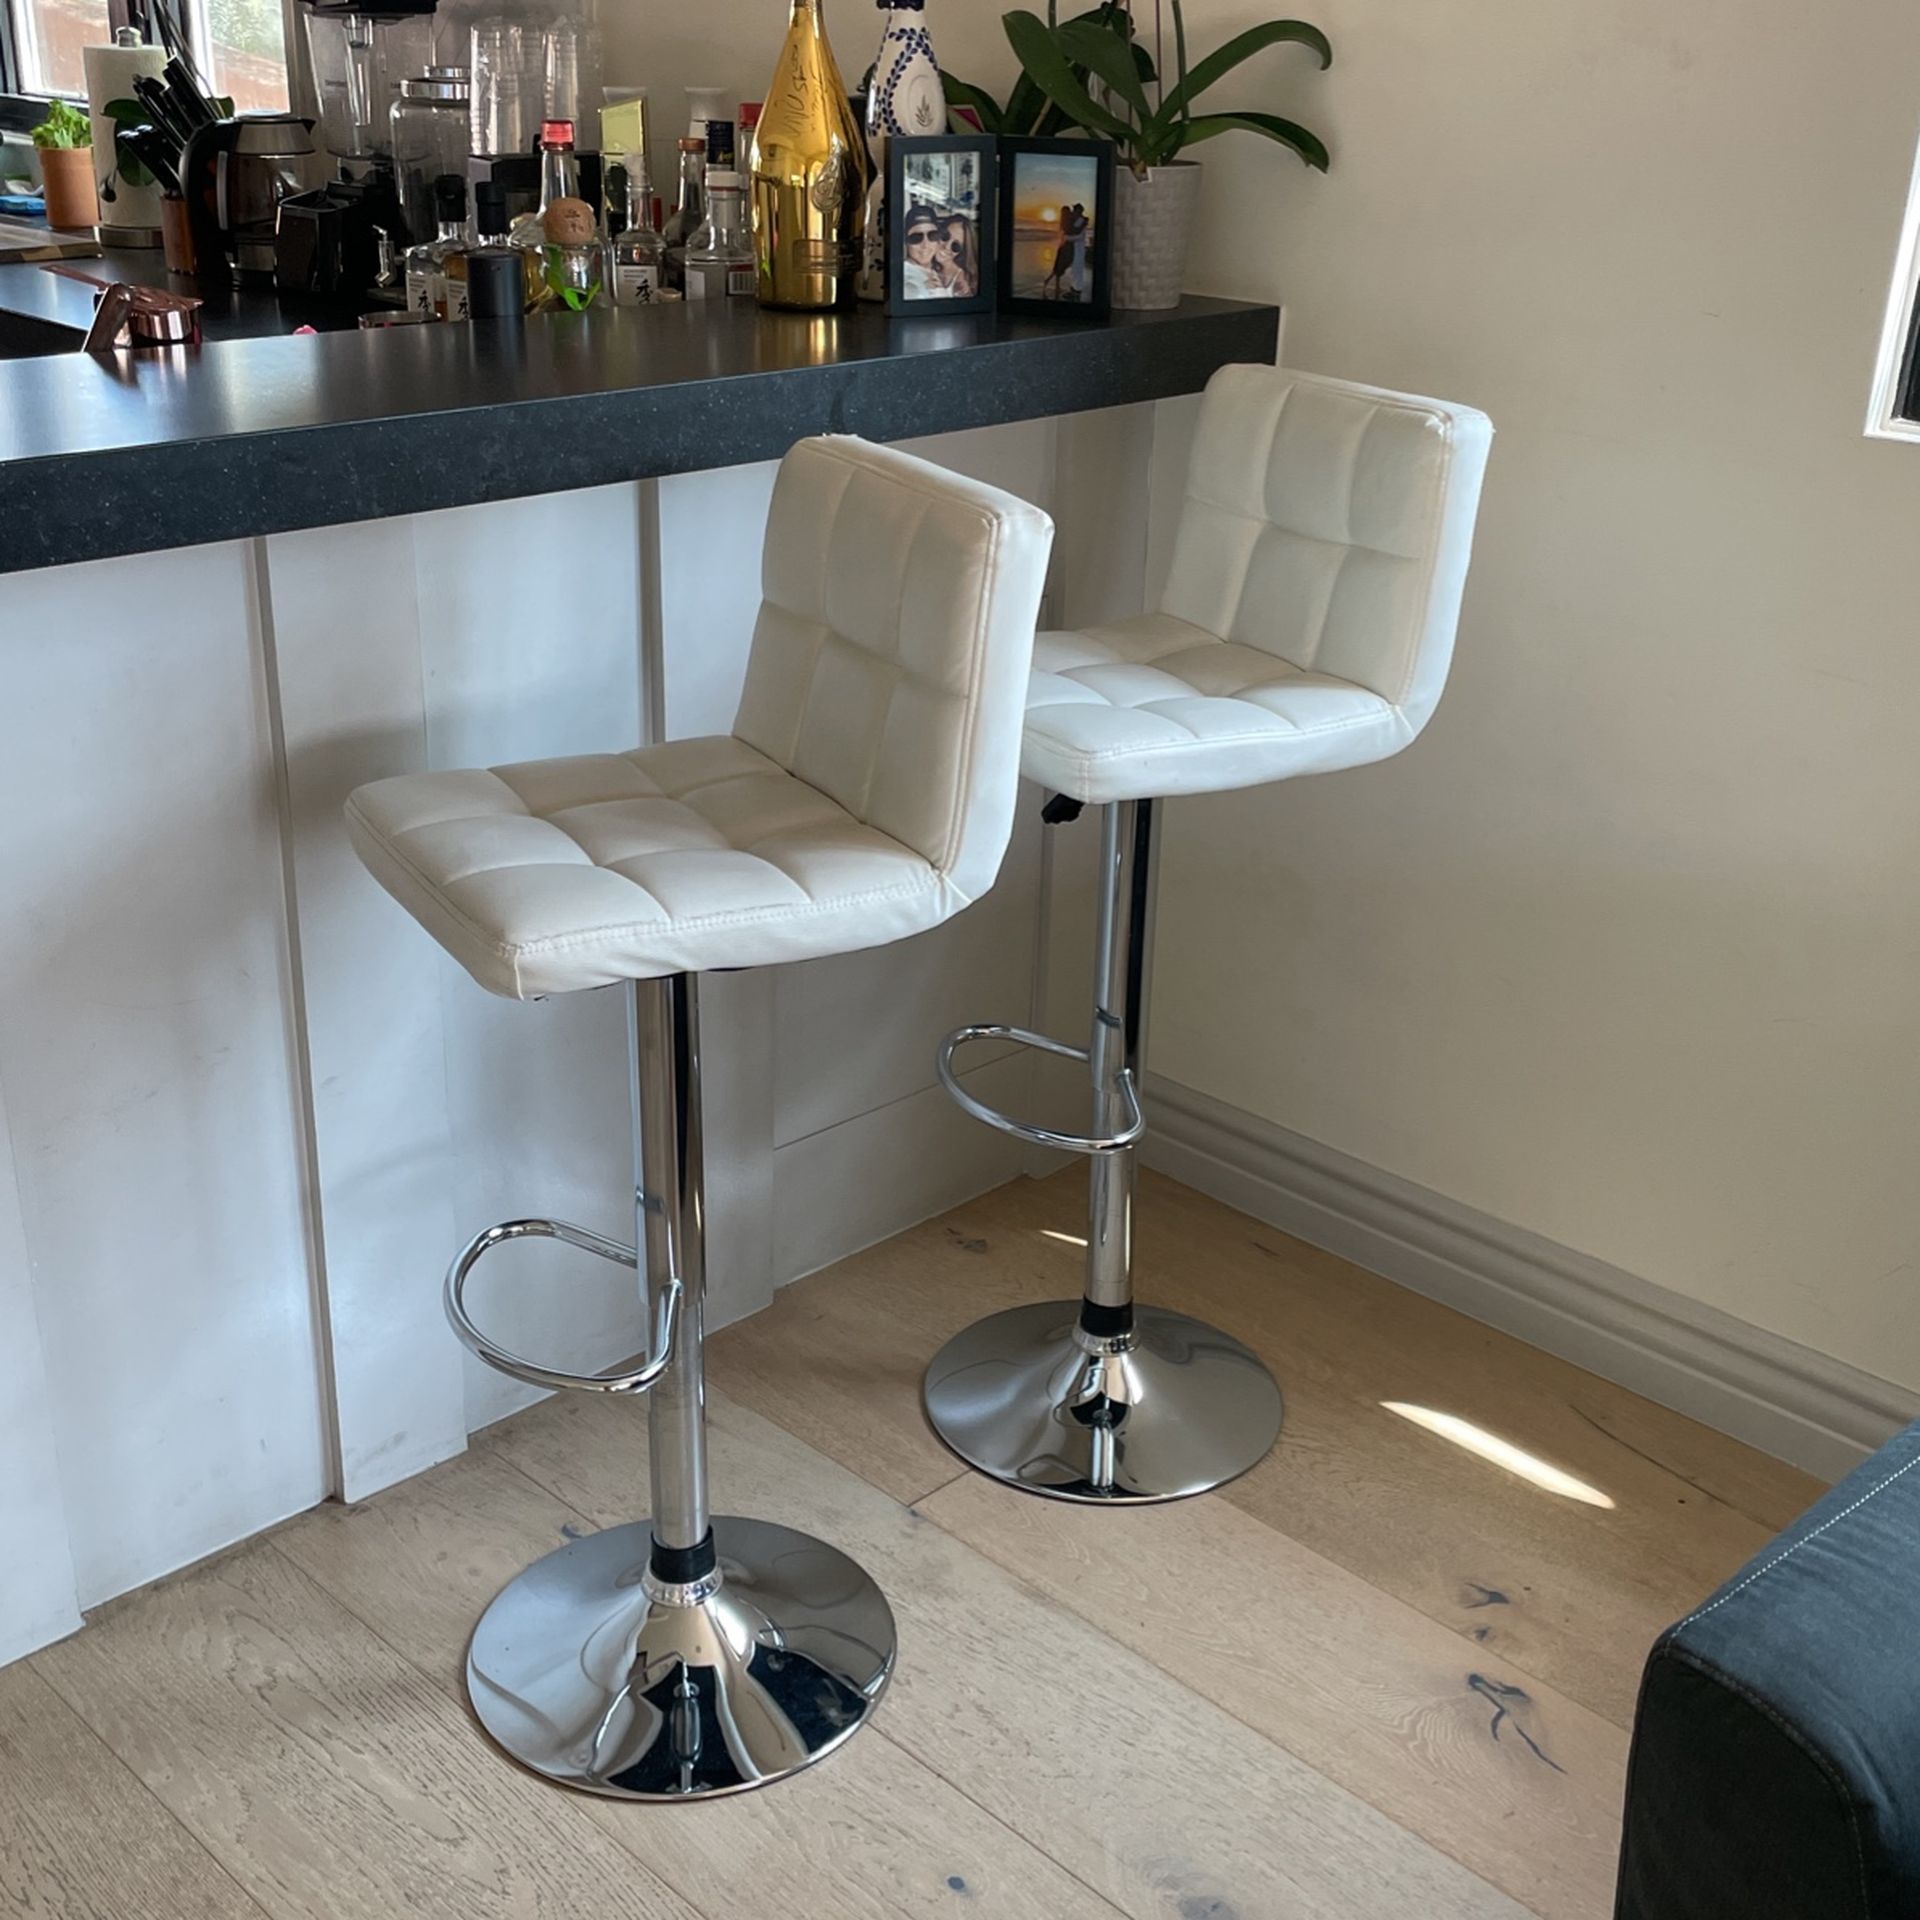 Two Bar Stool Chairs